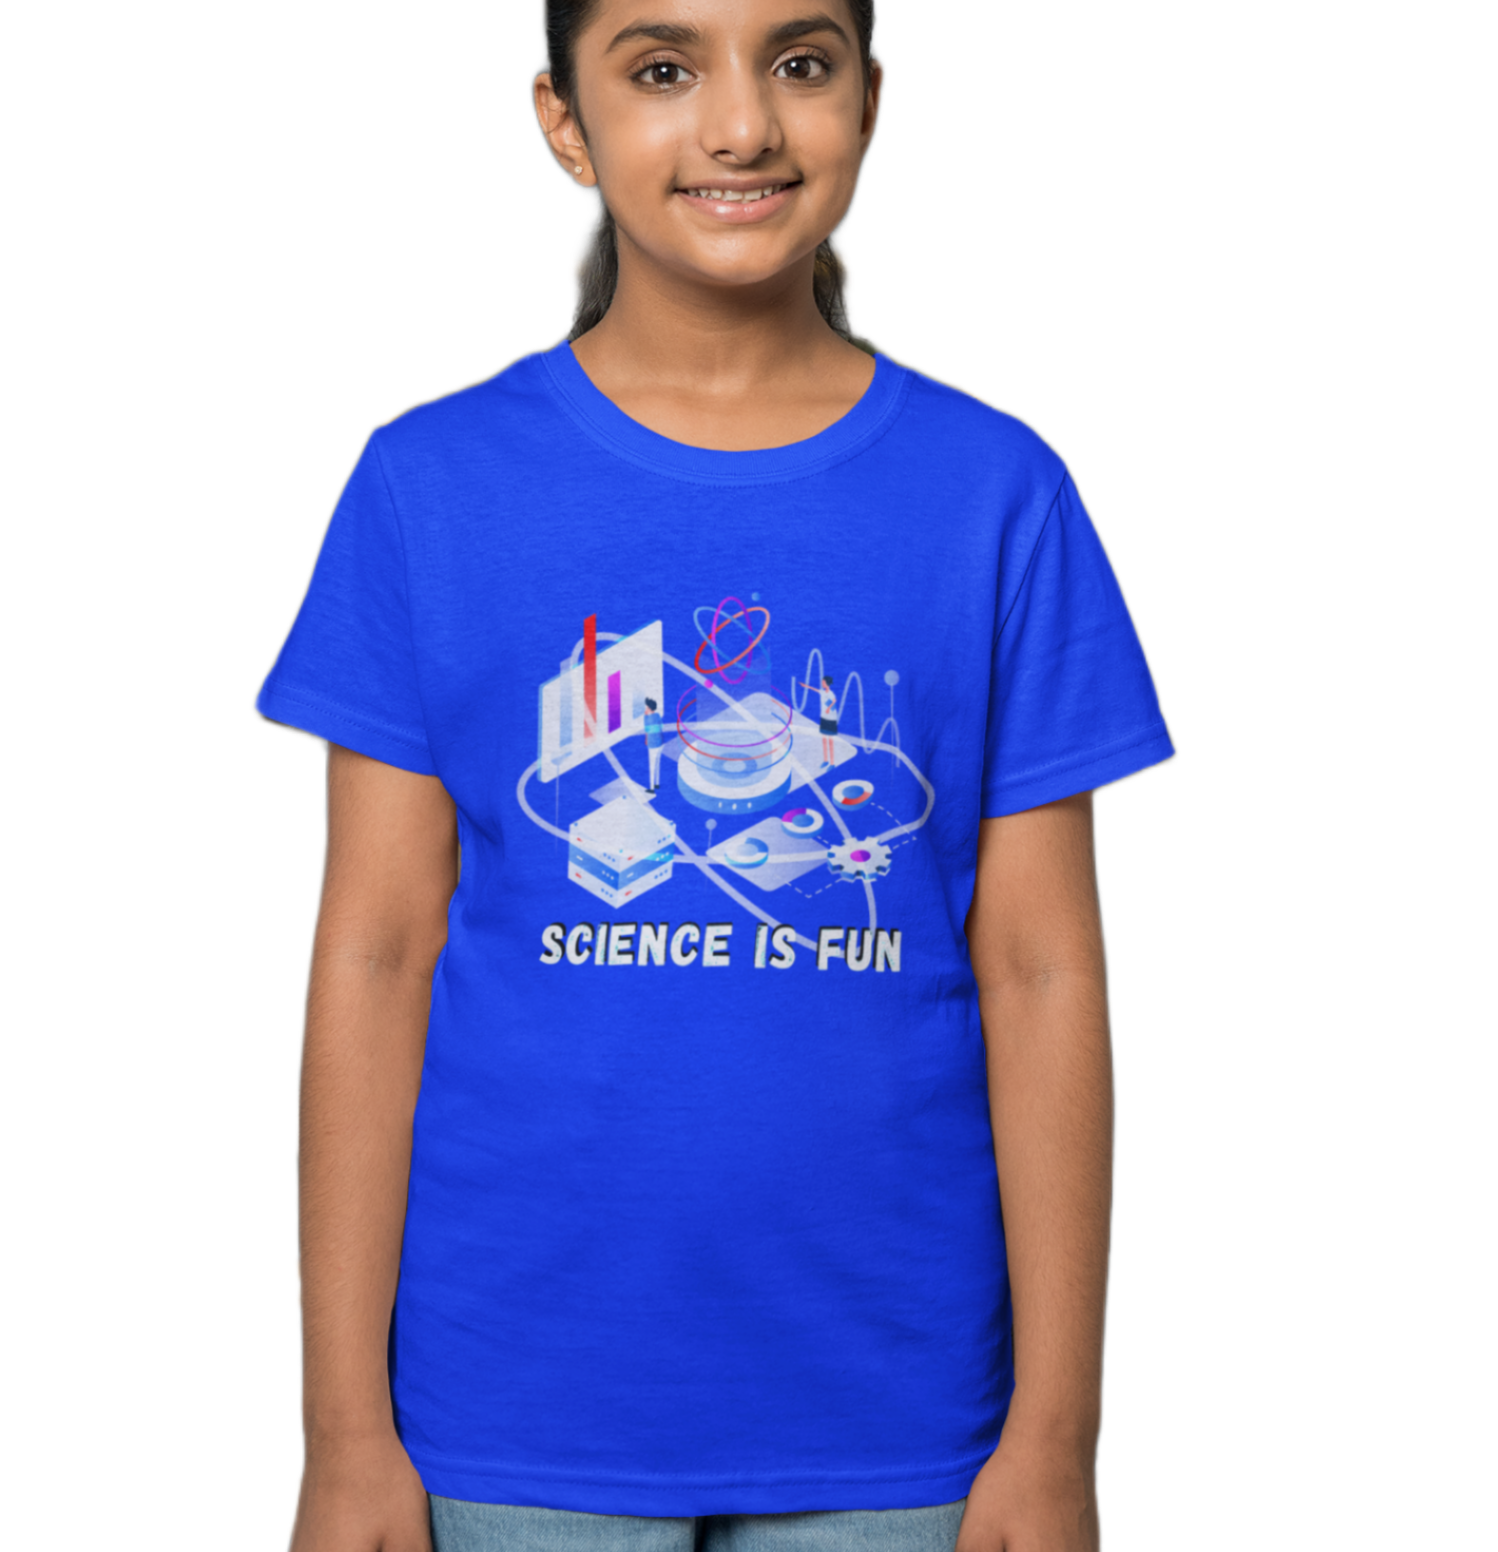 Science is Fun T-shirt for Kids Royal Blue